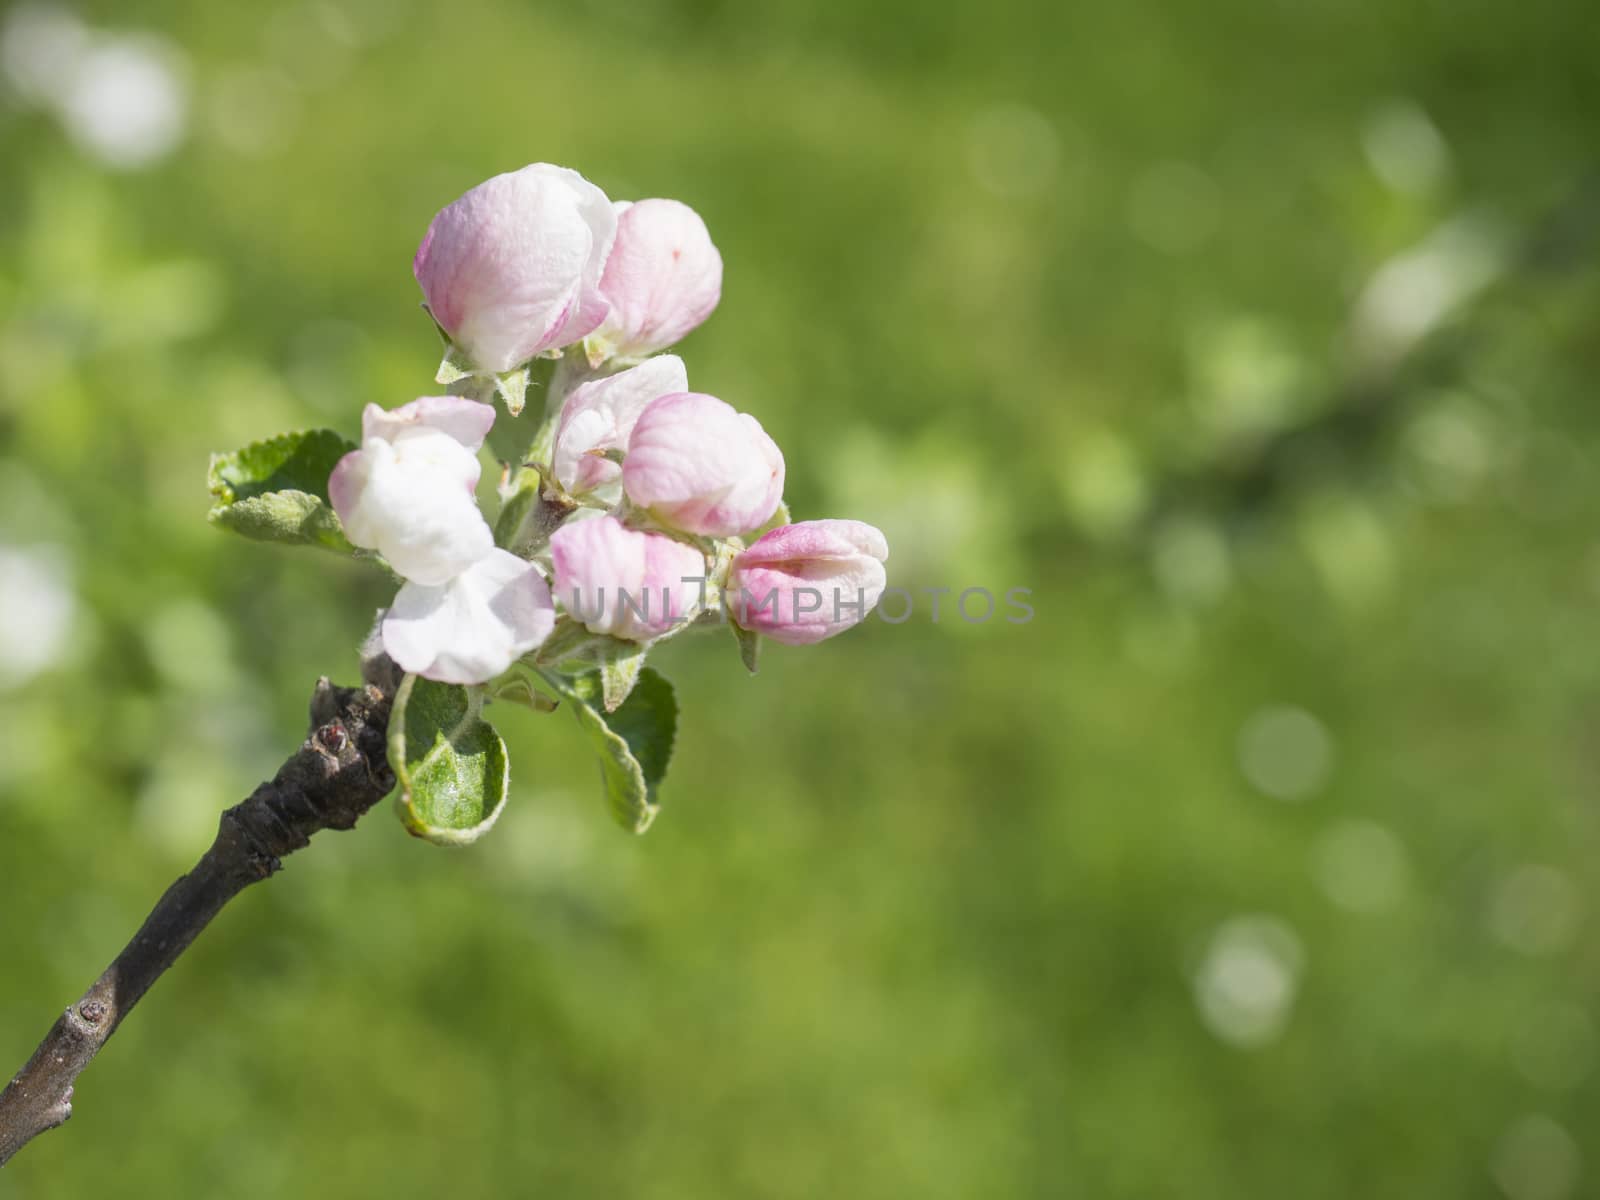 close up beautiful macro blooming pink apple blossom bud flower twing with leaves, selective focus, natural bokeh green background, copy space by Henkeova